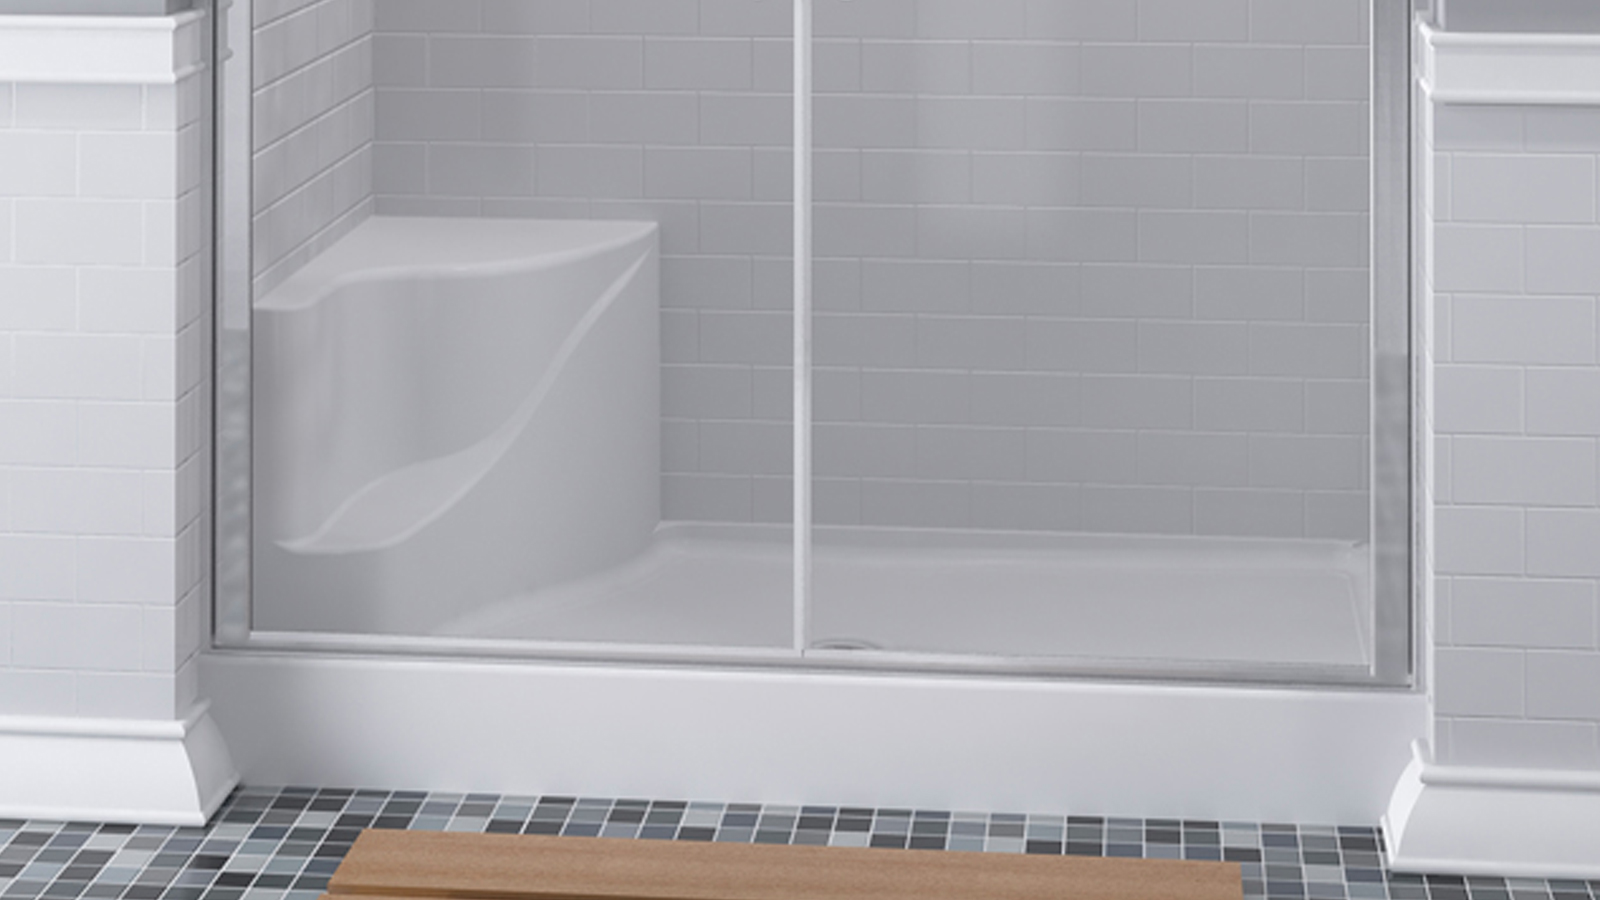 Walk-in shower with a seat in a white tiled shower.